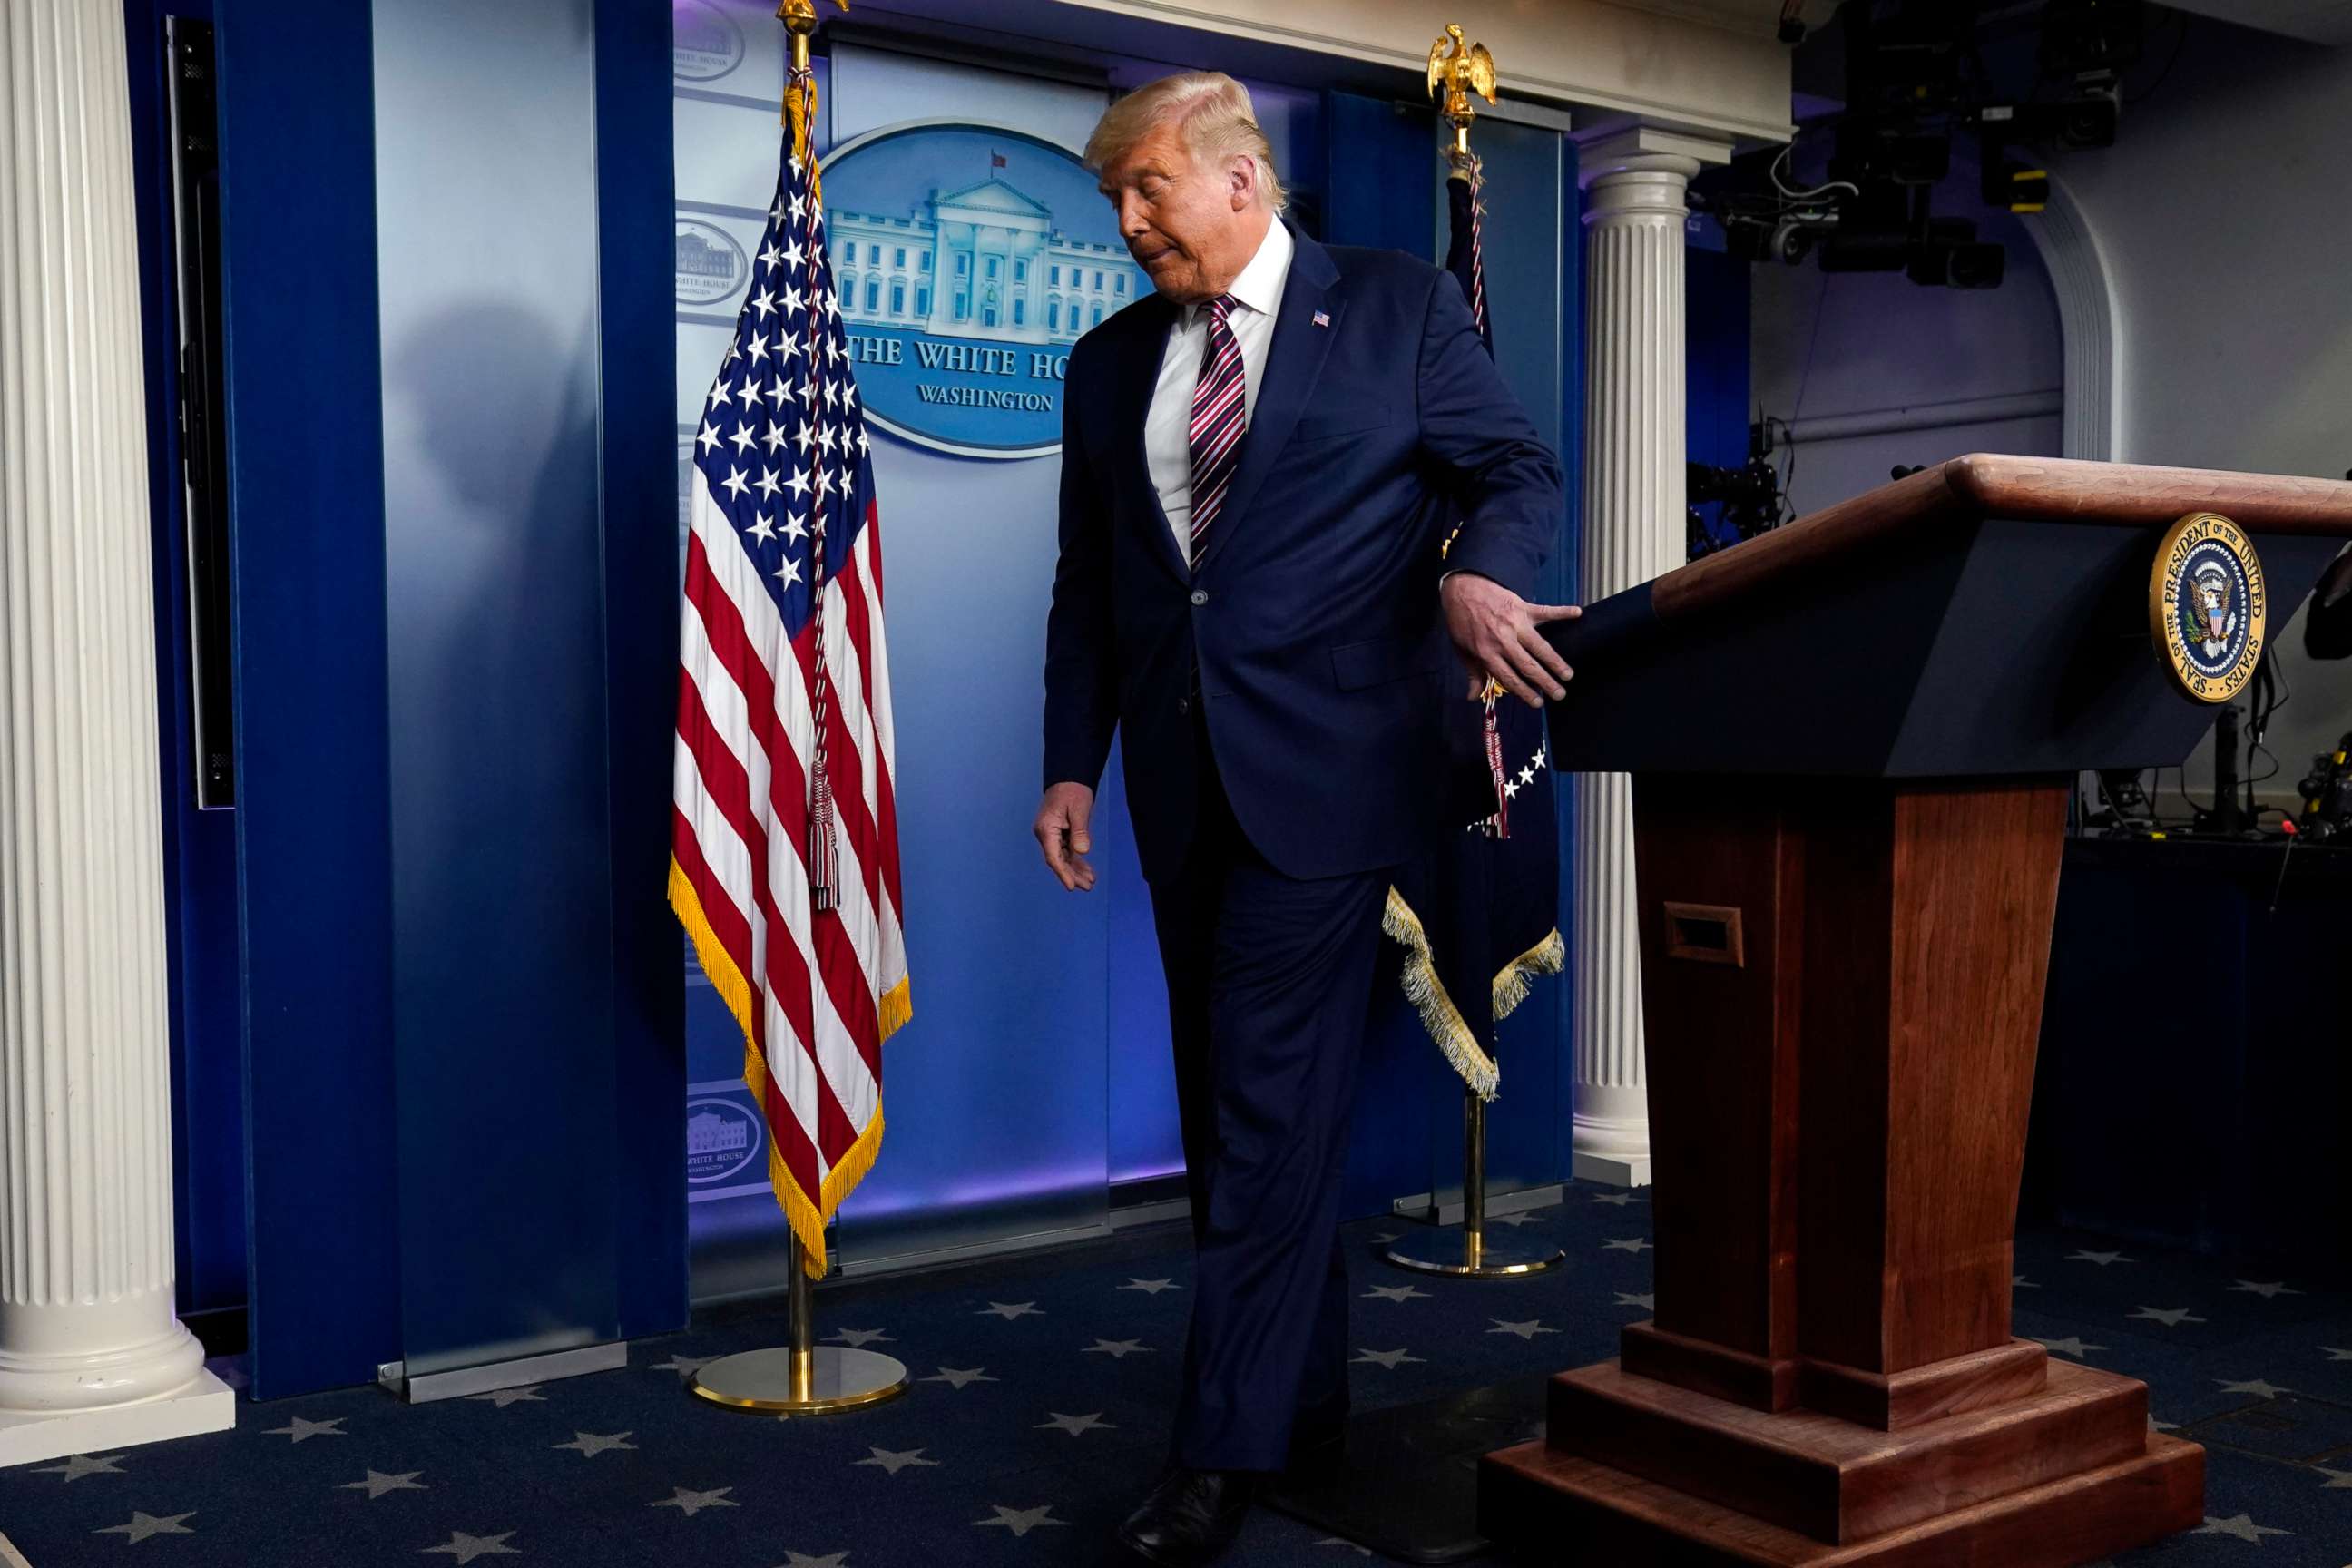 PHOTO: President Donald Trump leaves the podium after speaking at the White House, Thursday, Nov. 5, 2020, in Washington.